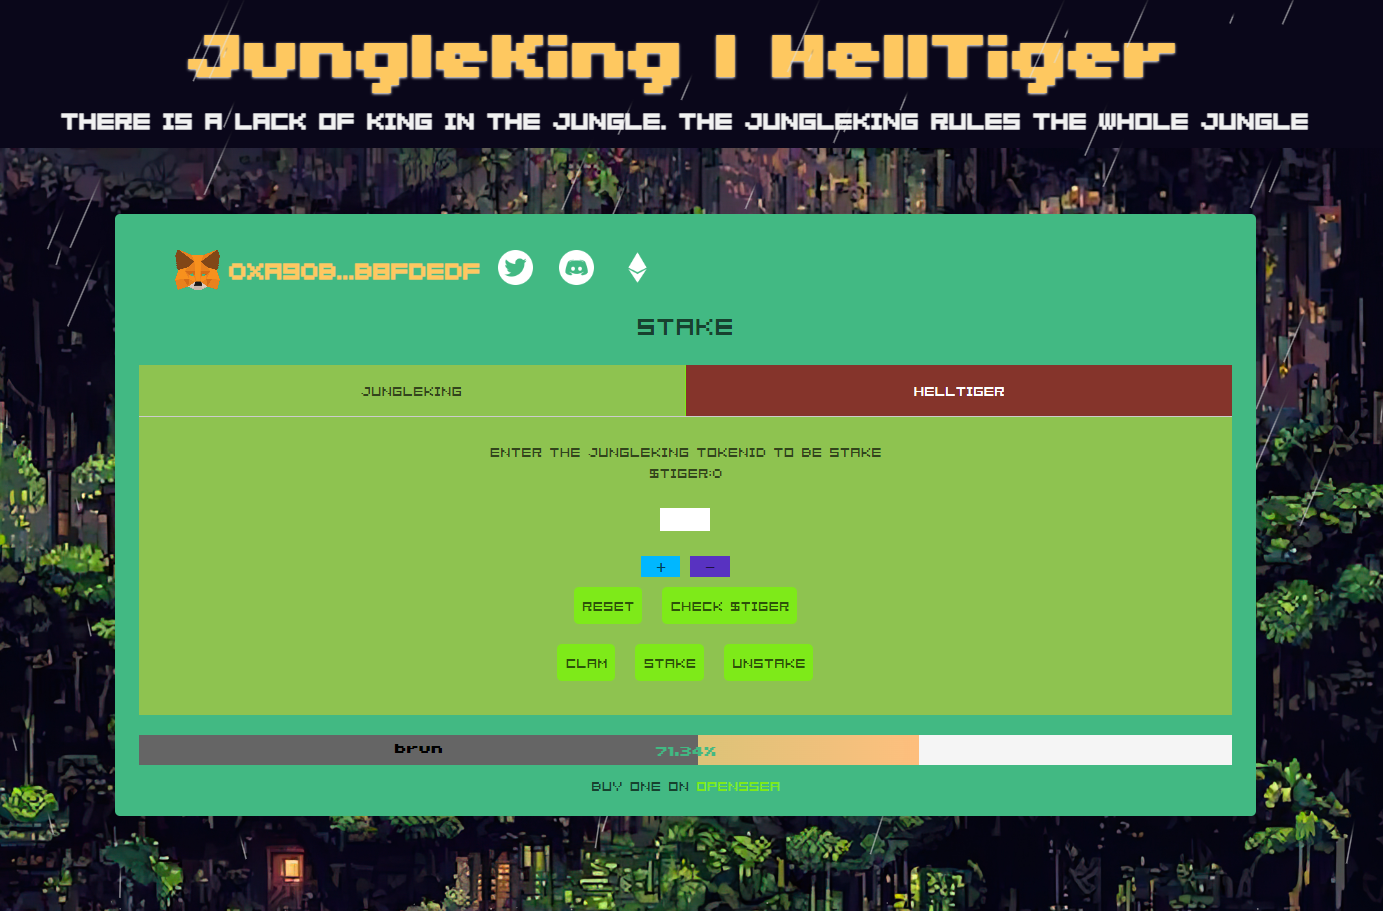 game image from JungleParty